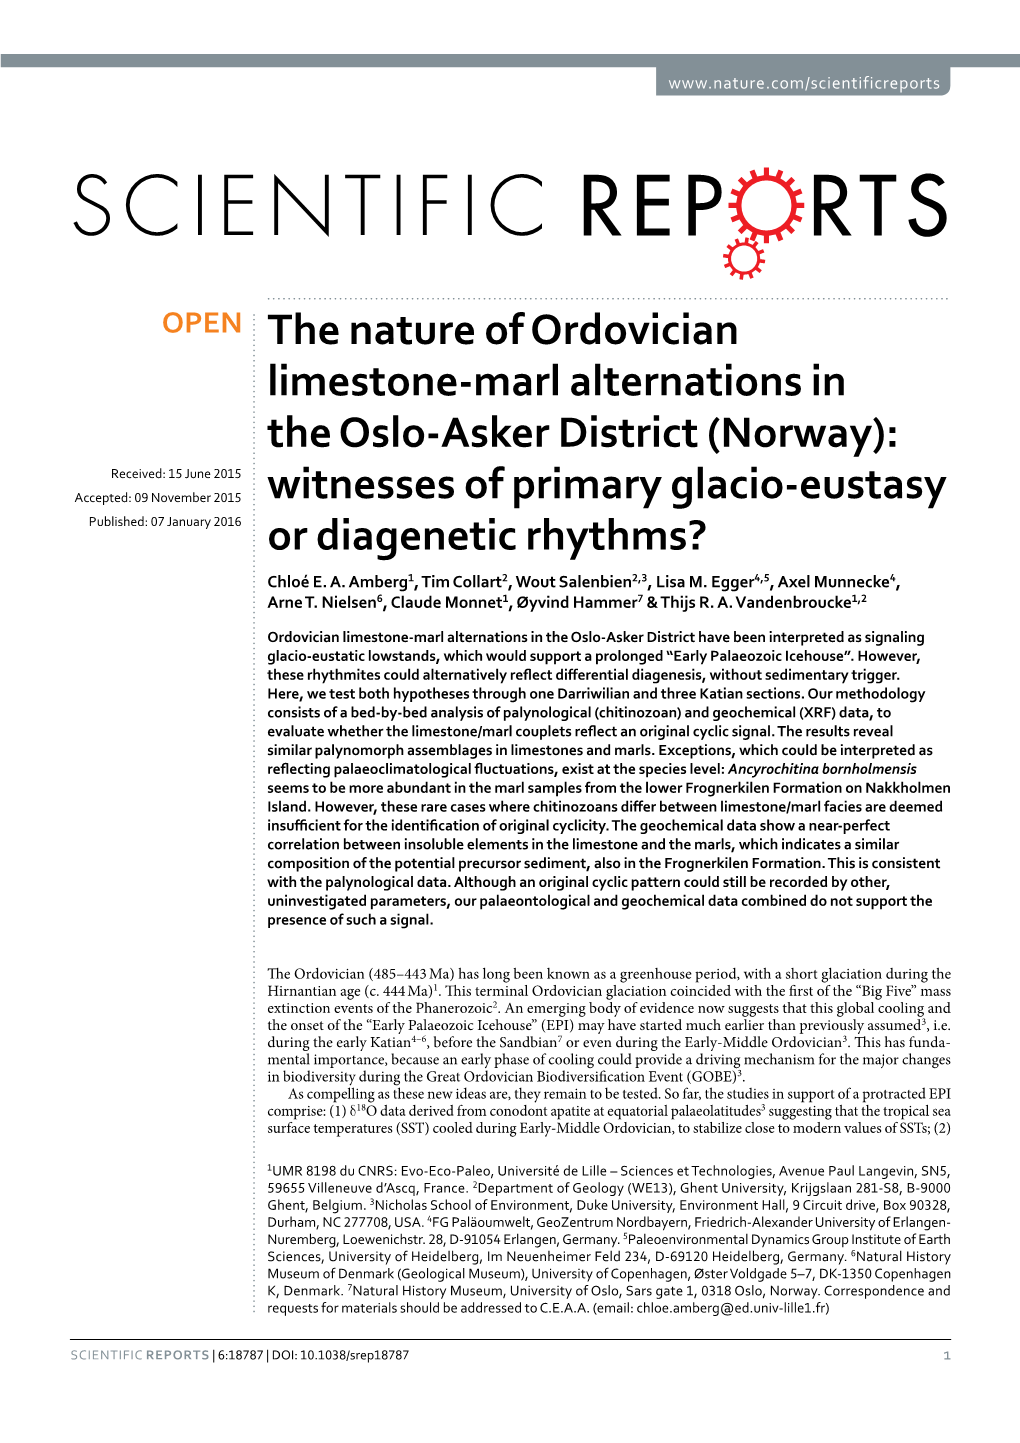 The Nature of Ordovician Limestone-Marl Alternations in the Oslo-Asker District